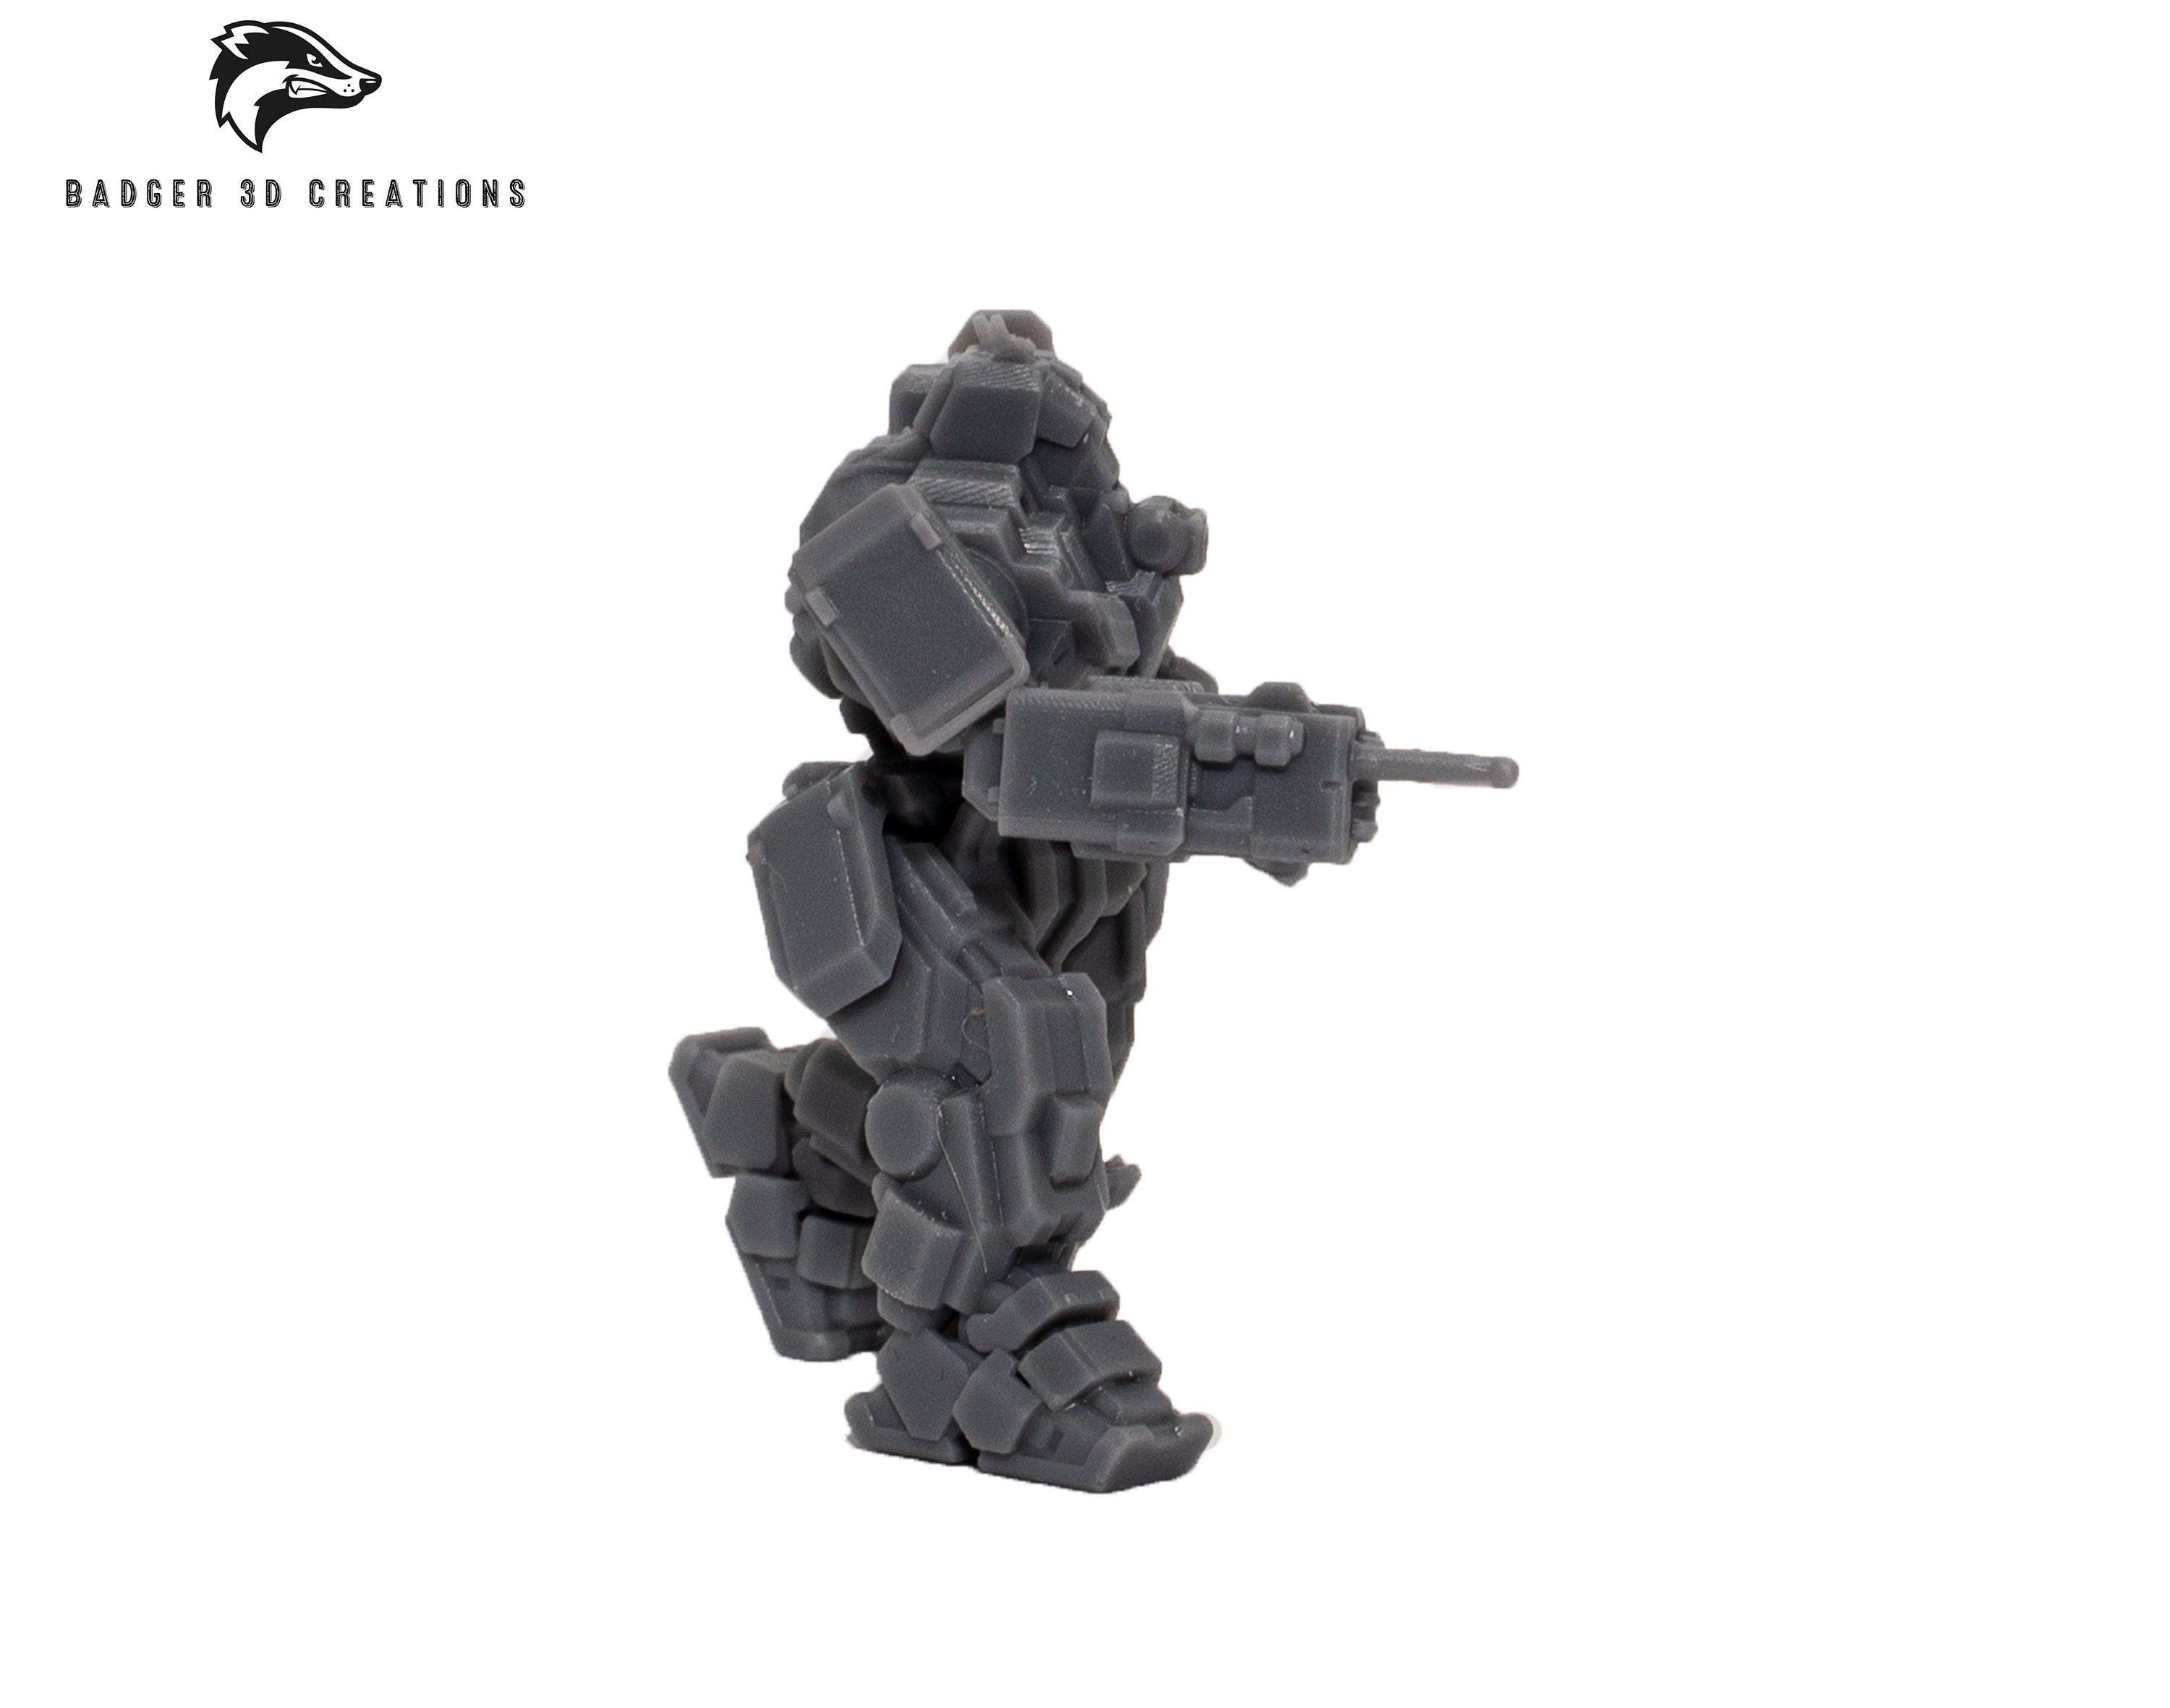 Wolverine Mech for Battletech - With Hex Base